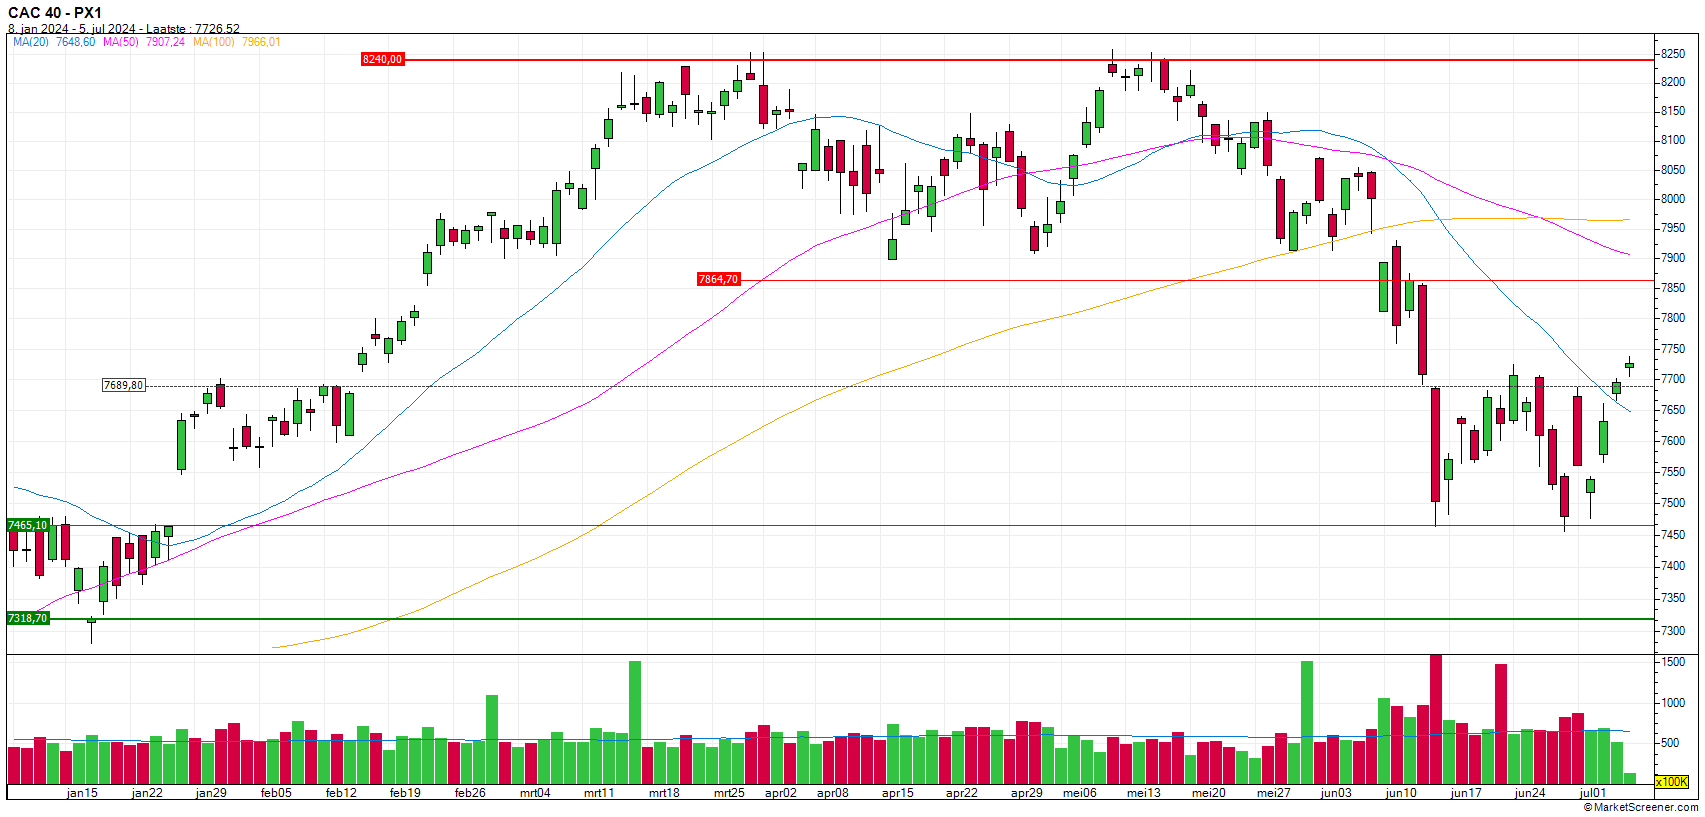 https://www.zonebourse.com/zbcache/charts/ObjectChart.aspx?Name=4941&Type=Custom&Intraday=1&Width=1705&Height=817&Cycle=DAY1&Duration=6&ShowCopyright=2&Company=Skin:Alex_nl&ShowName=1&ShowDate=1&Show&Render=Candle